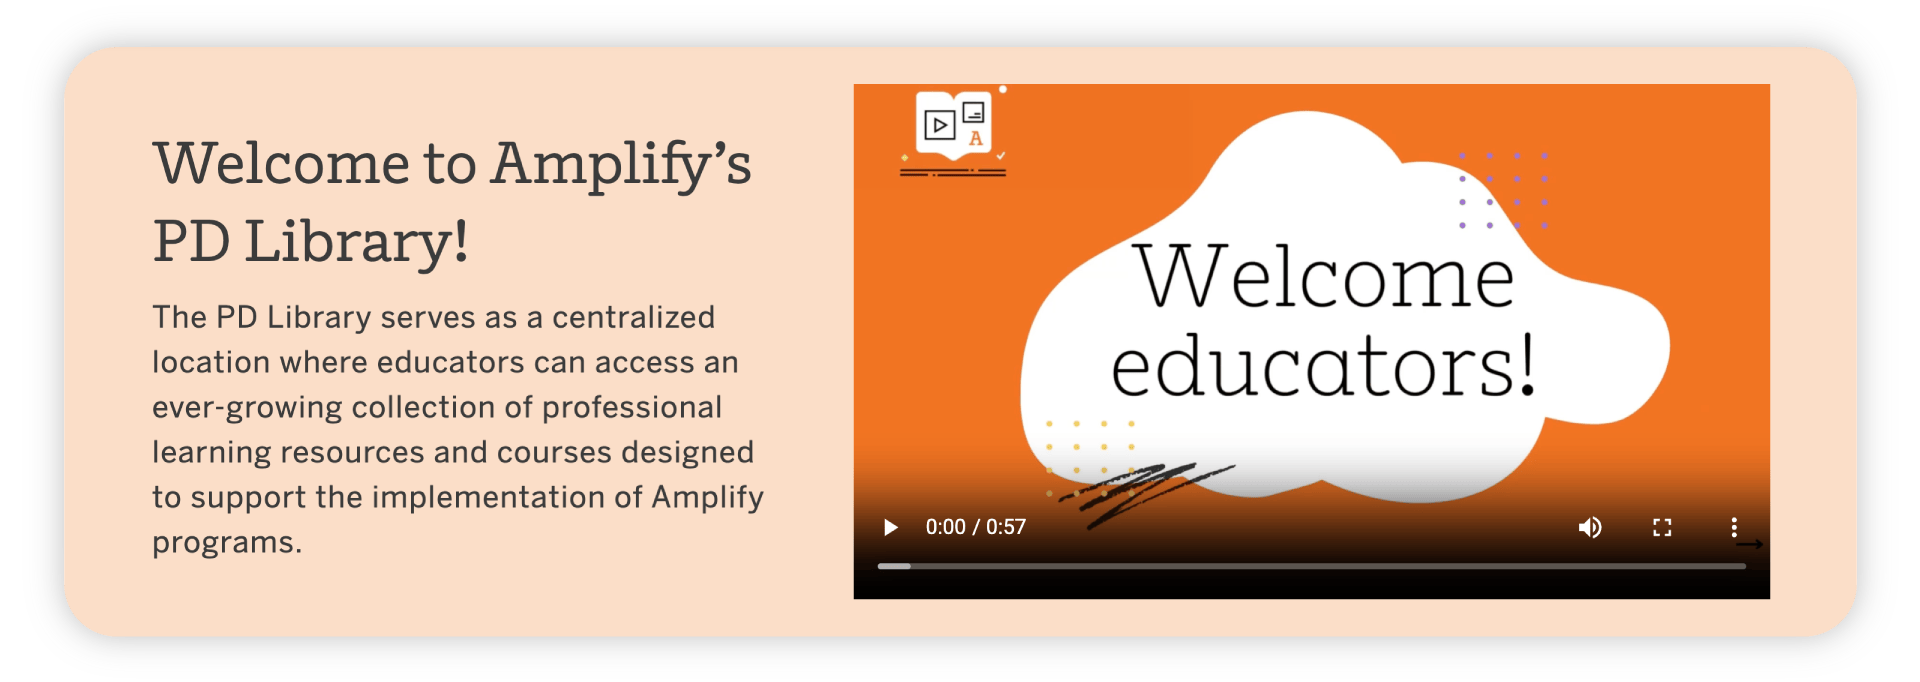 Video player displaying a welcome message for educators on Amplify's PD library website with introductory text about resources available, including the upcoming mCLASS coming soon and mCLASS Lectura.